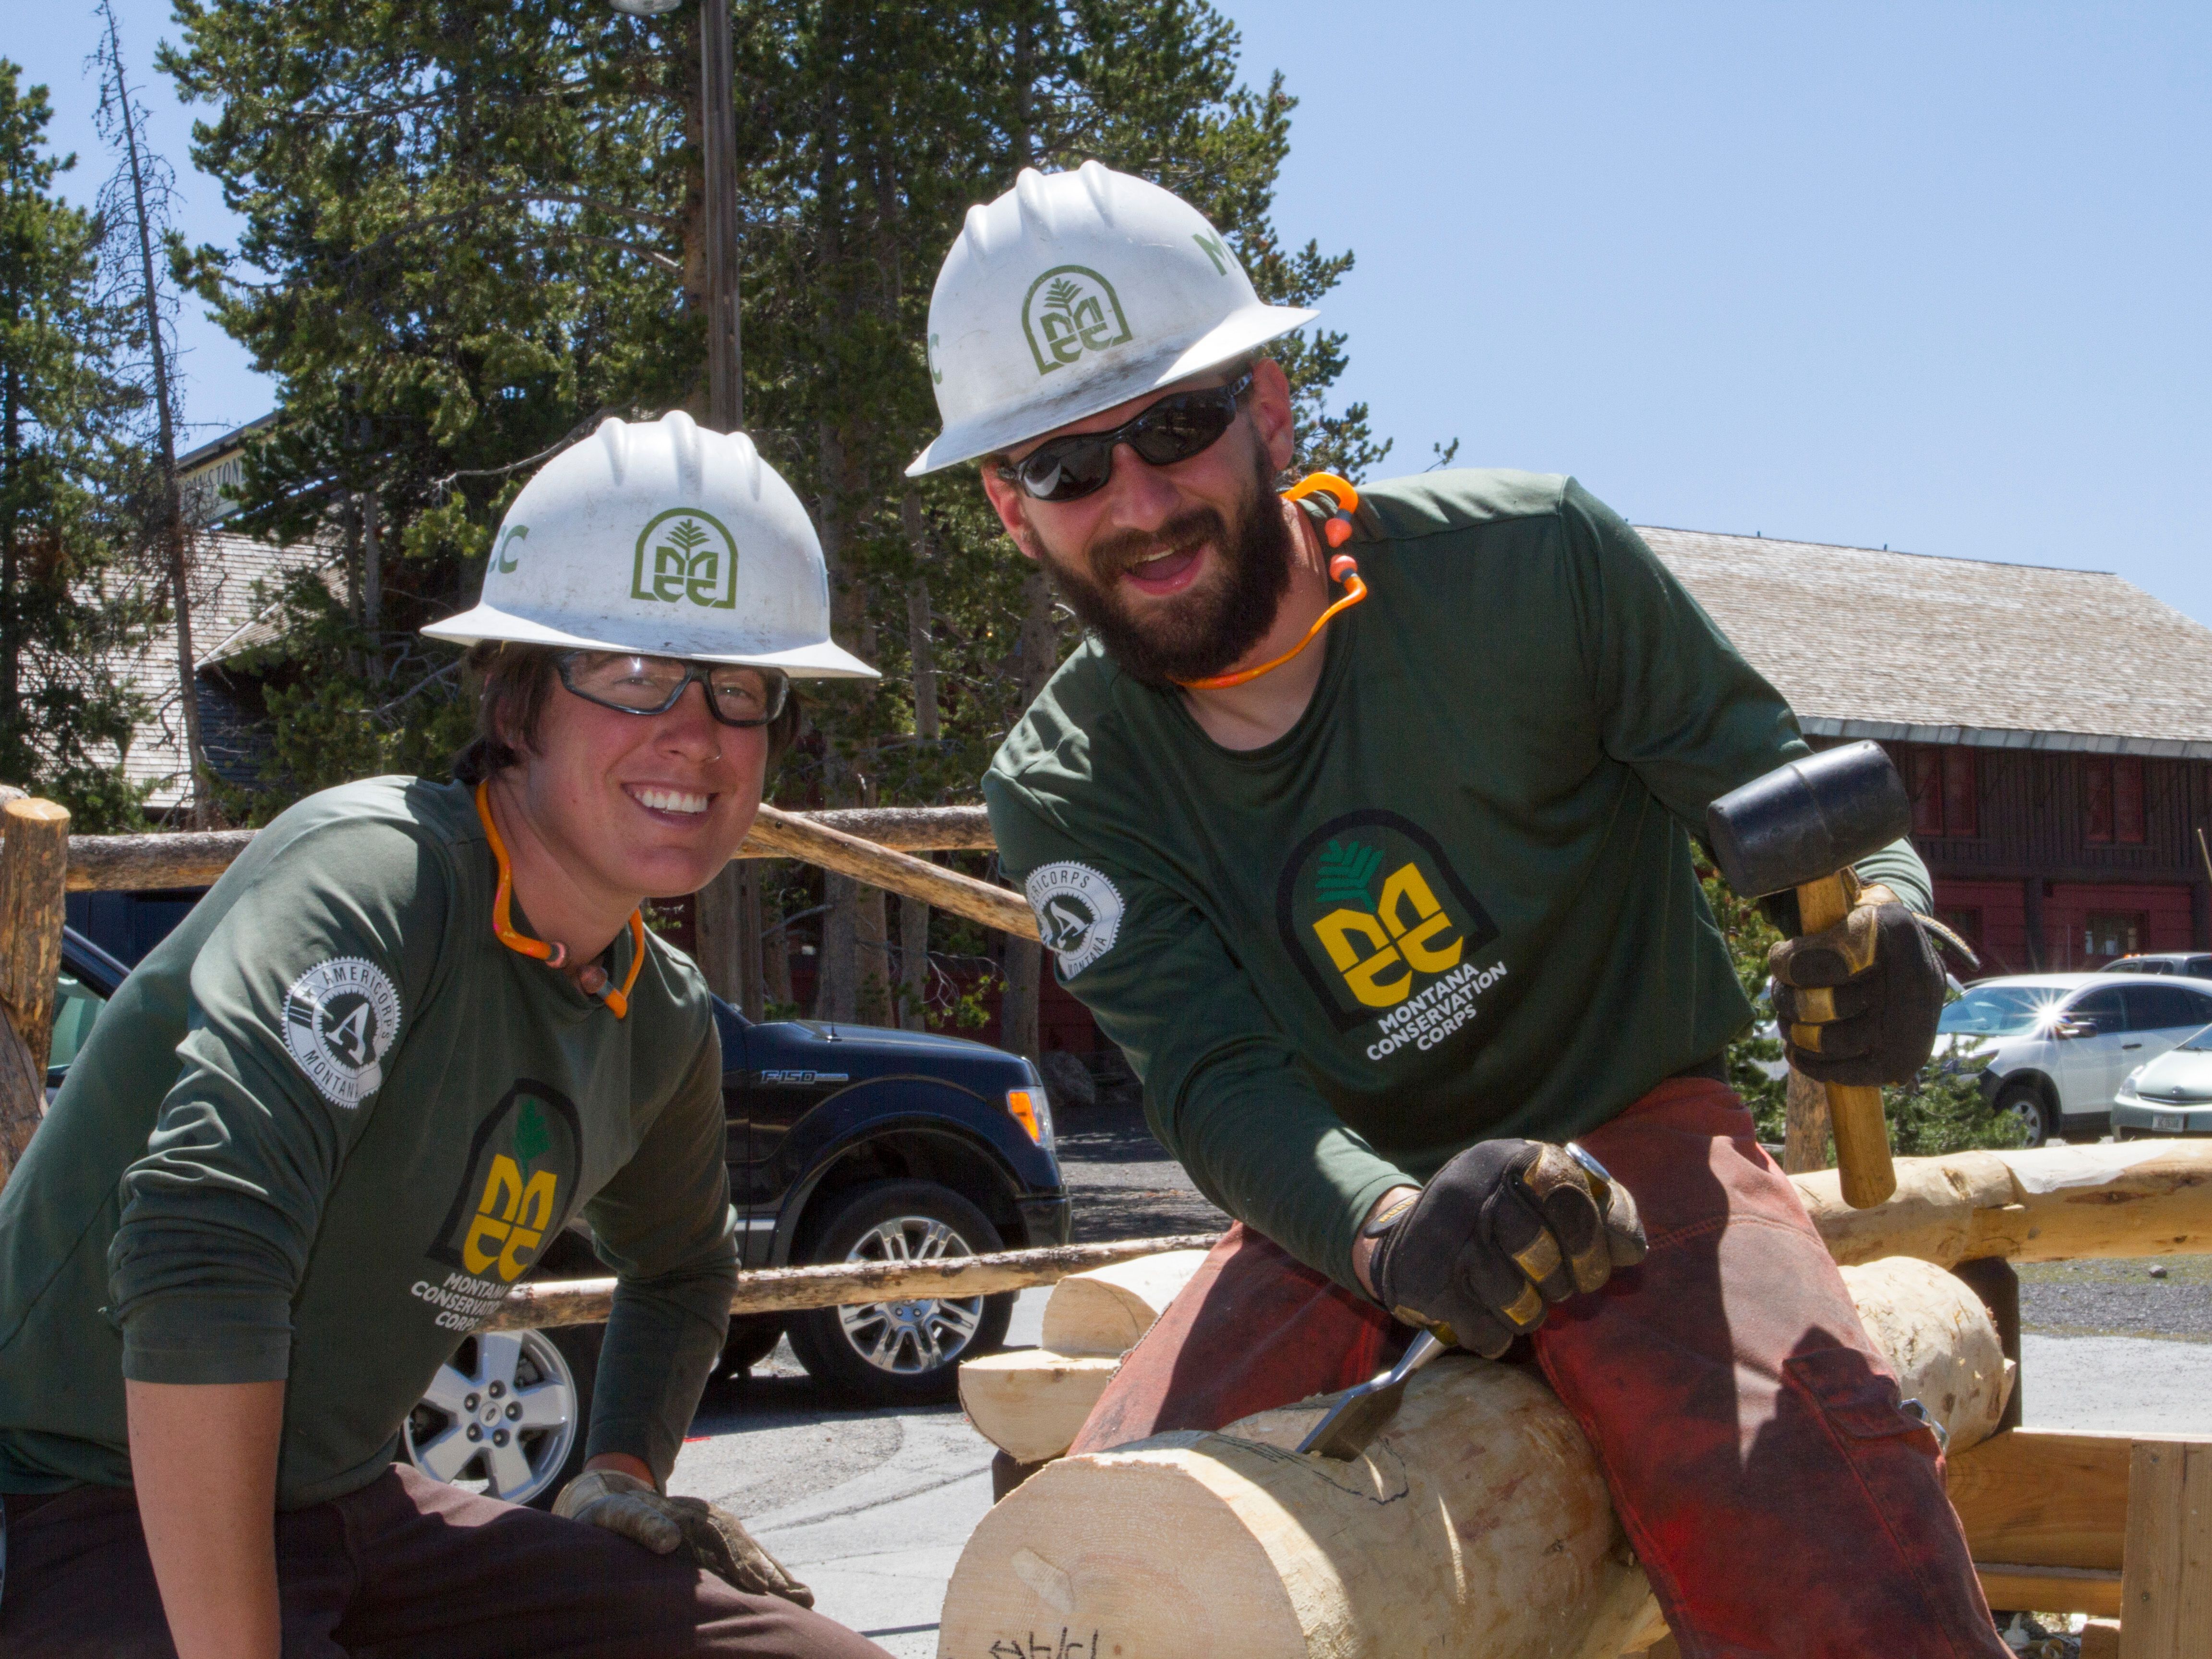 [Image description: A sunny day, centered are two MCC crew members notching a log with a mallet and chisel, smiling through protective gear; clear glasses, ear plugs, helmets and gloves on.]